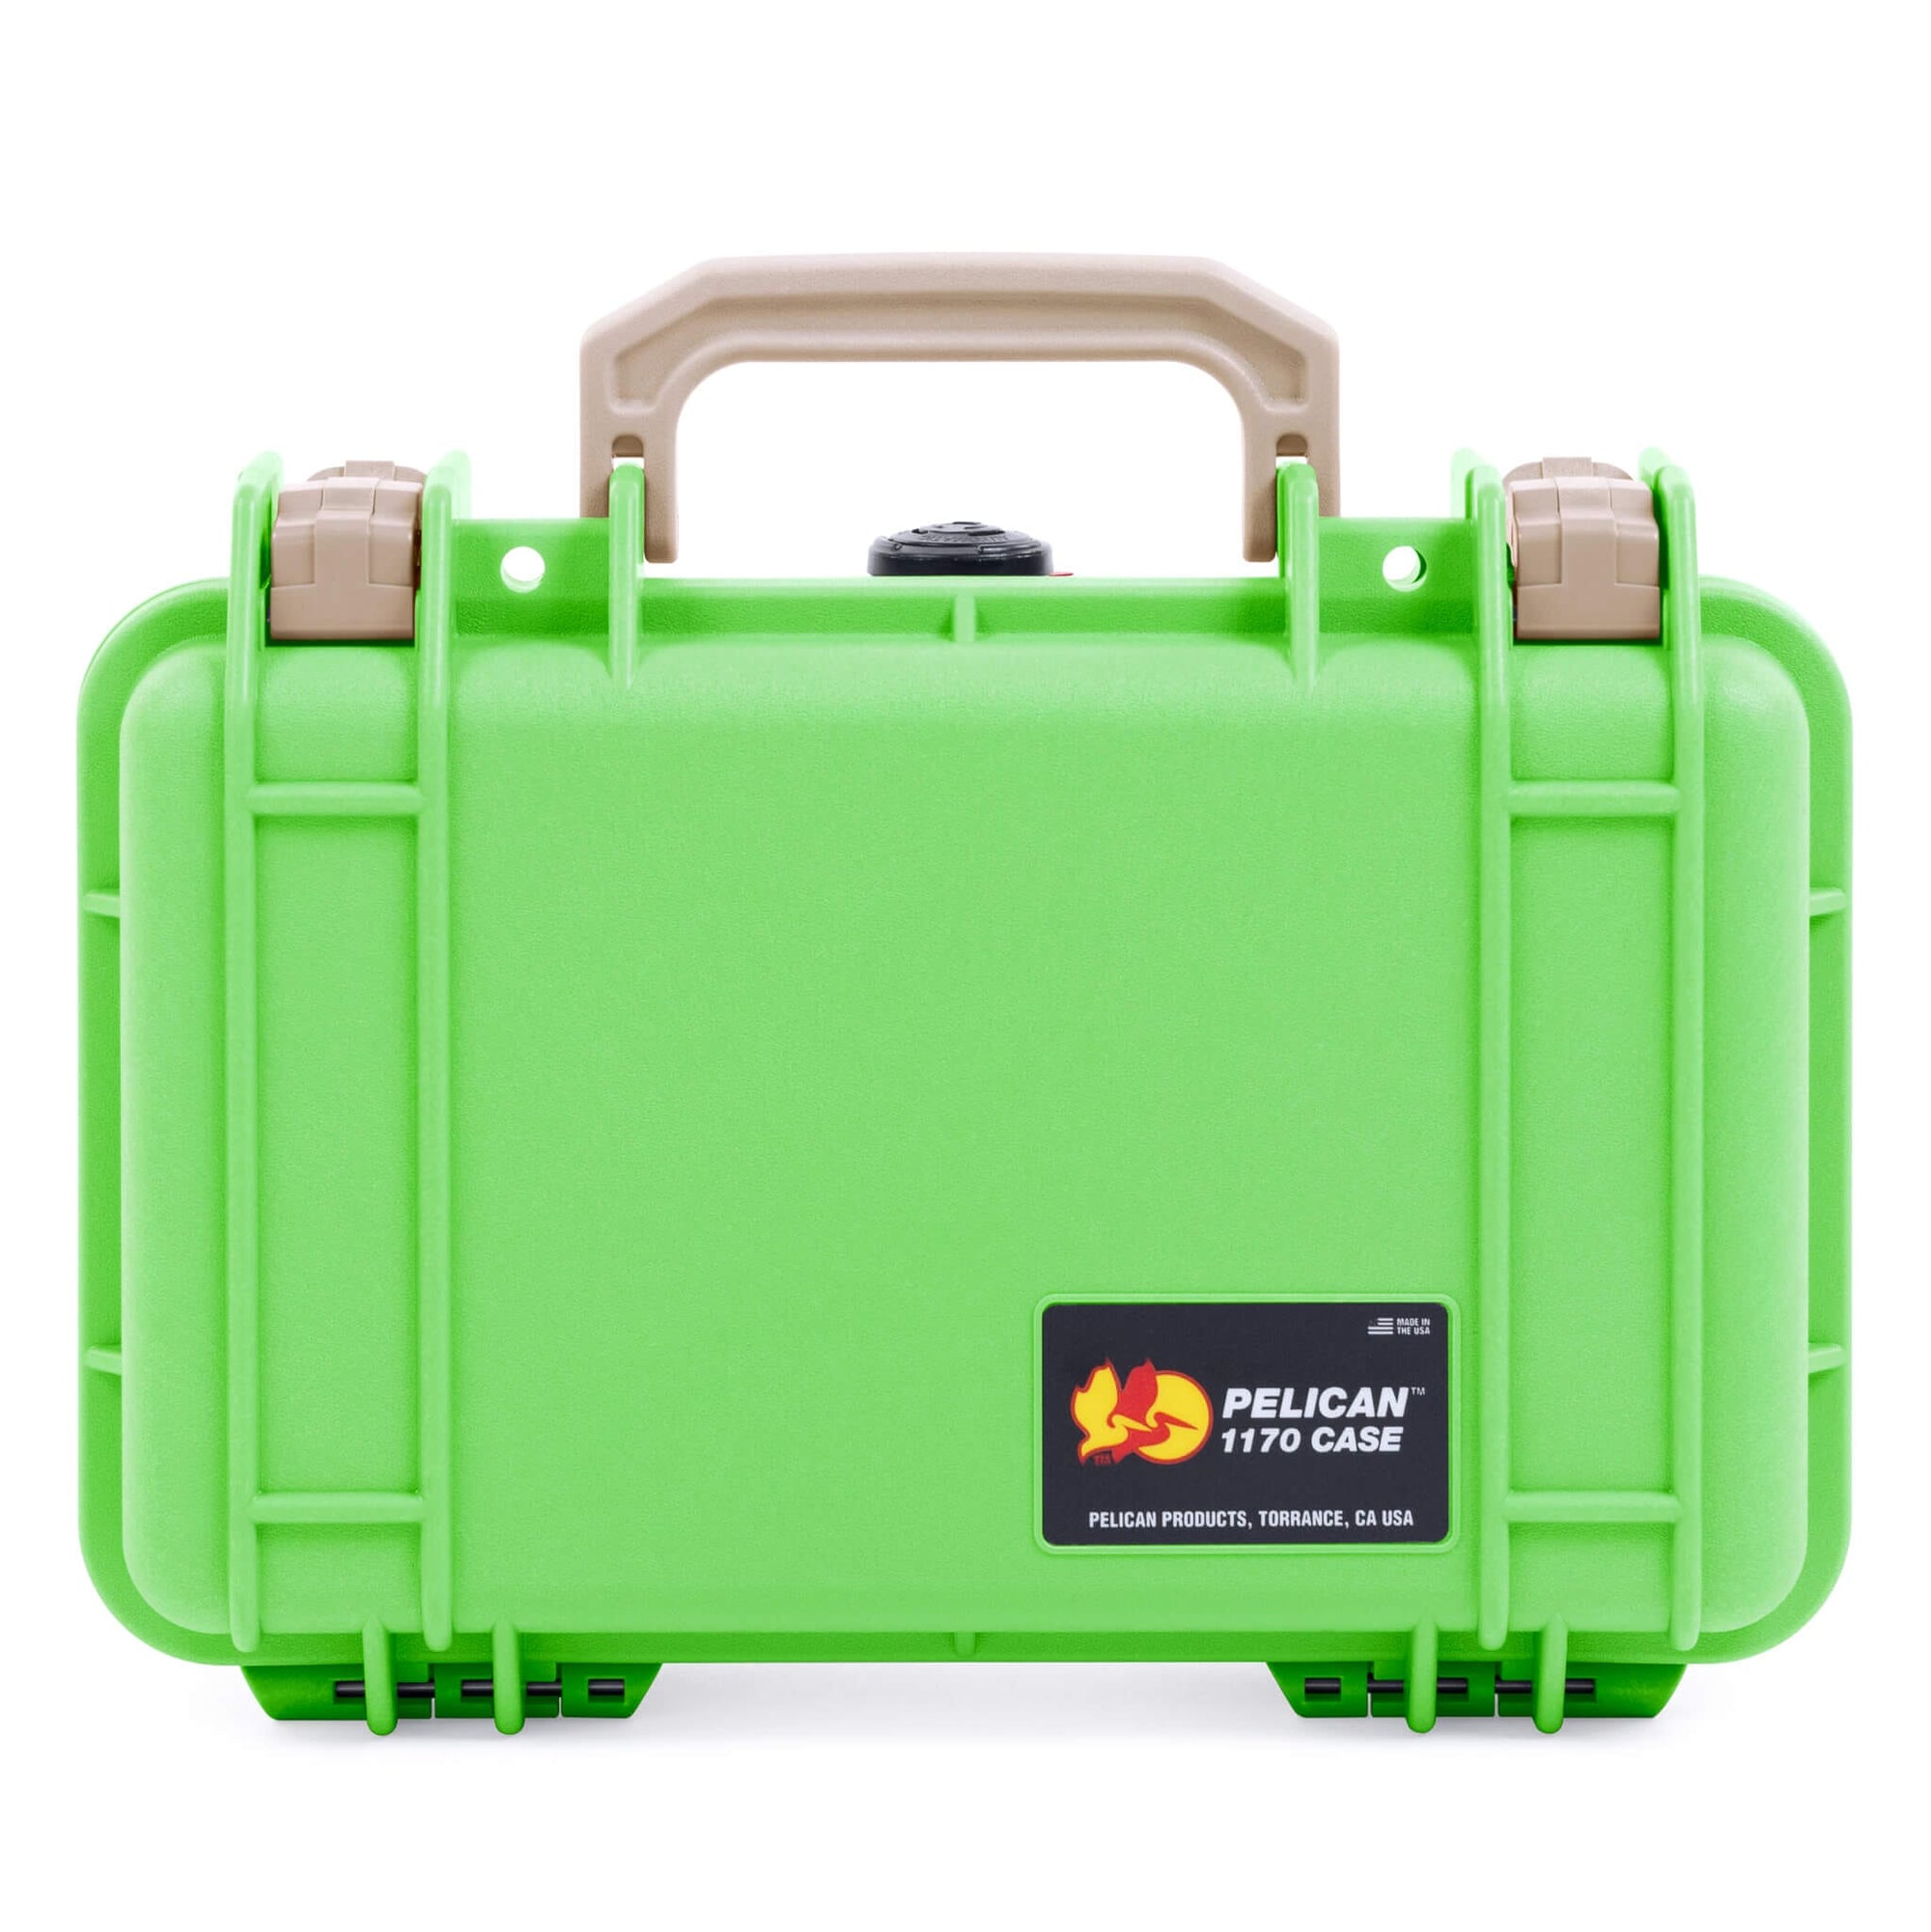 Pelican 1170 Case, Lime Green with Desert Tan Handle & Latches ColorCase 